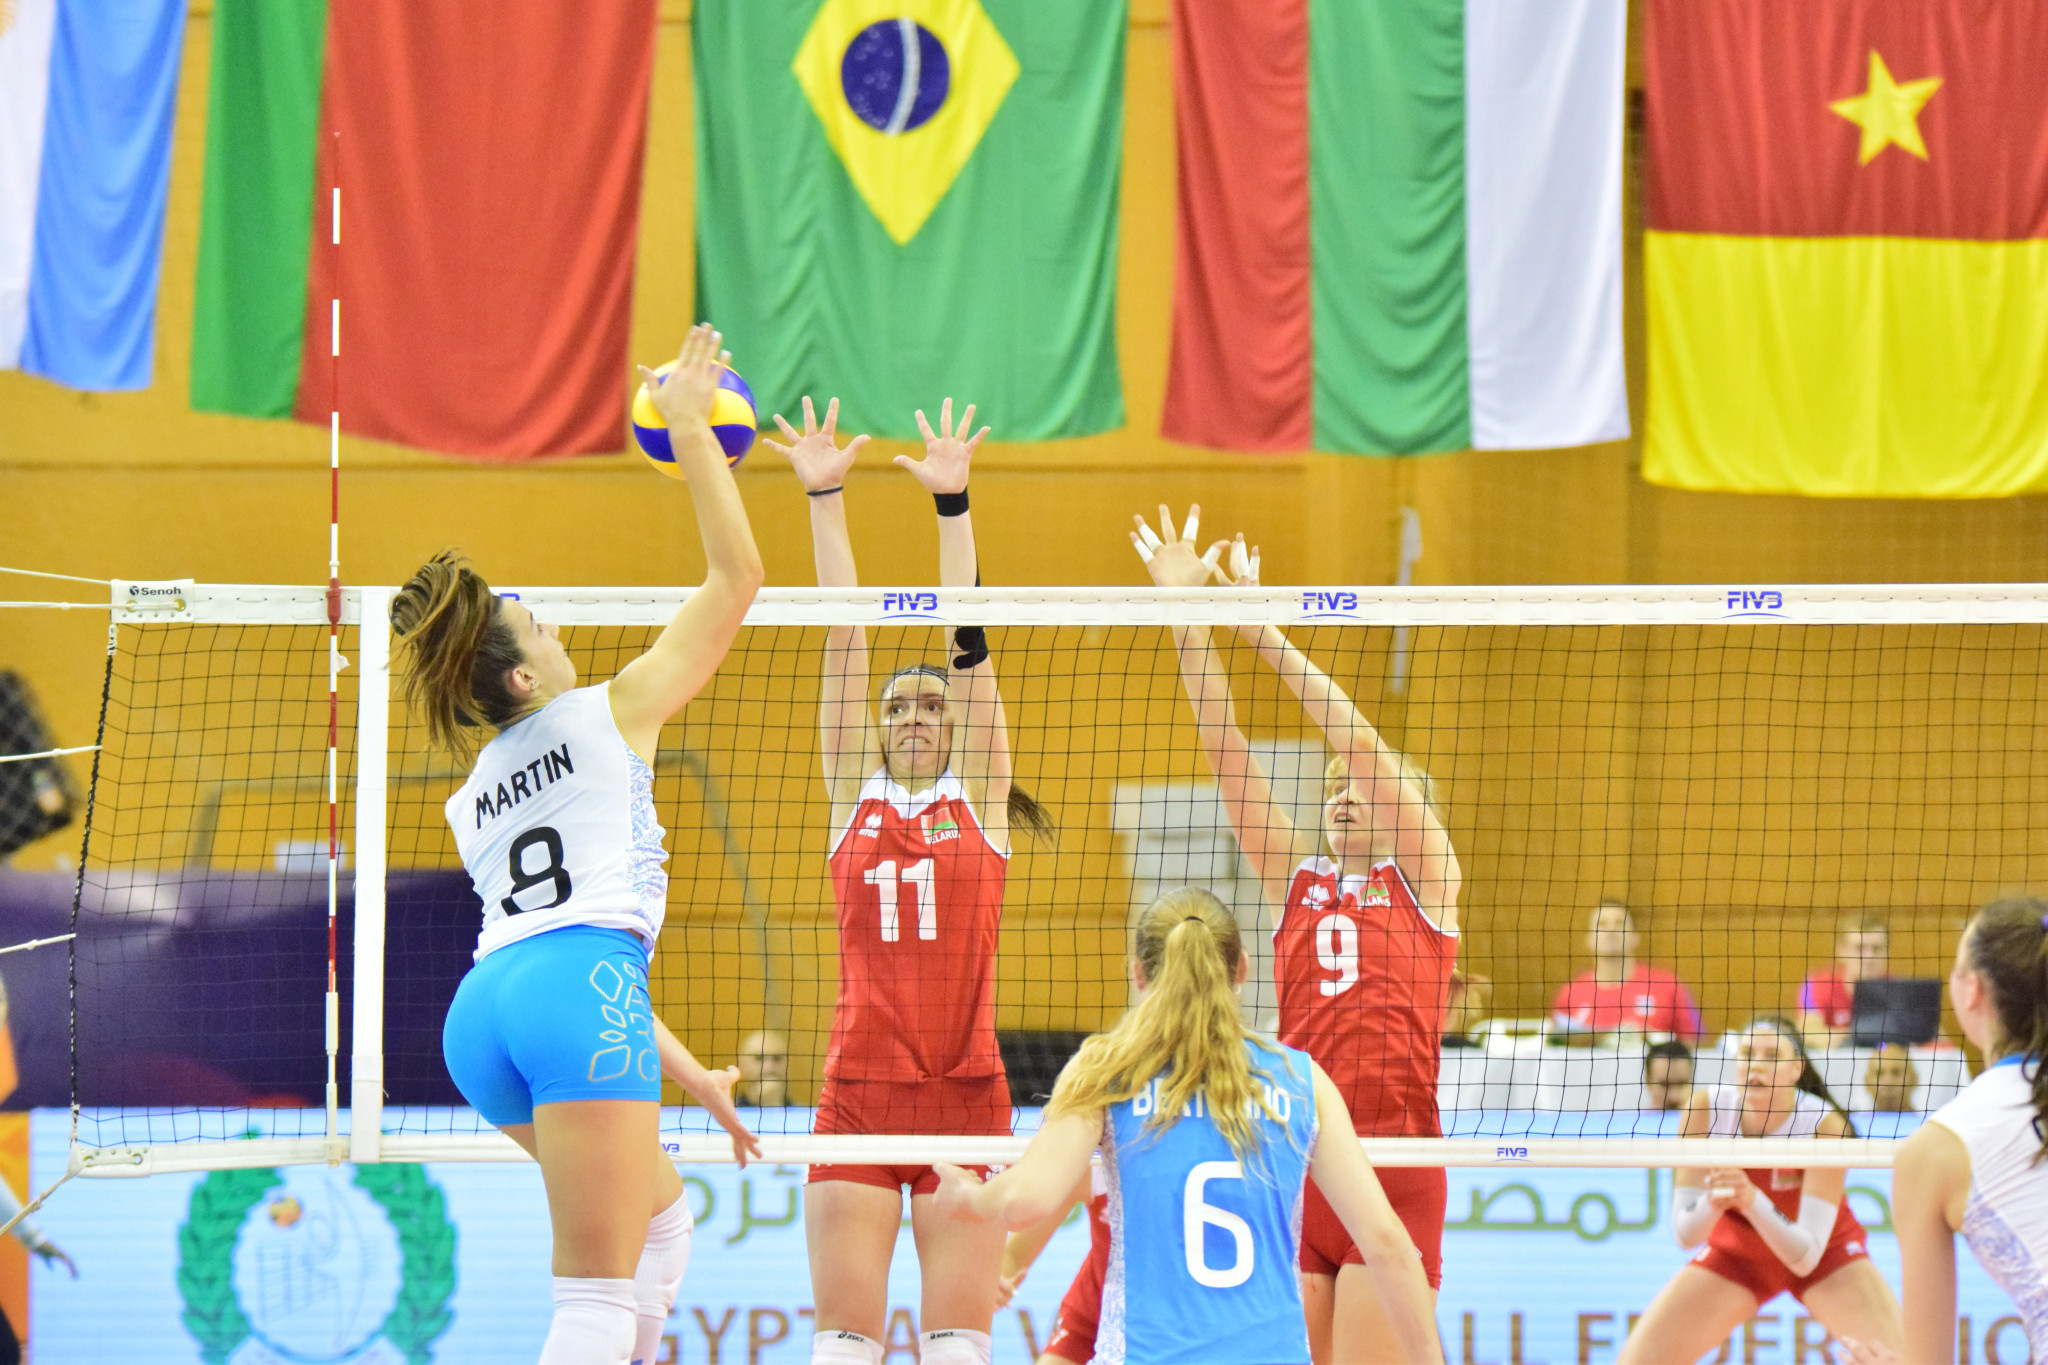 Two knock-out places remain unclaimed after latest pool matches at FIVB Girls' Under-18 World Championship